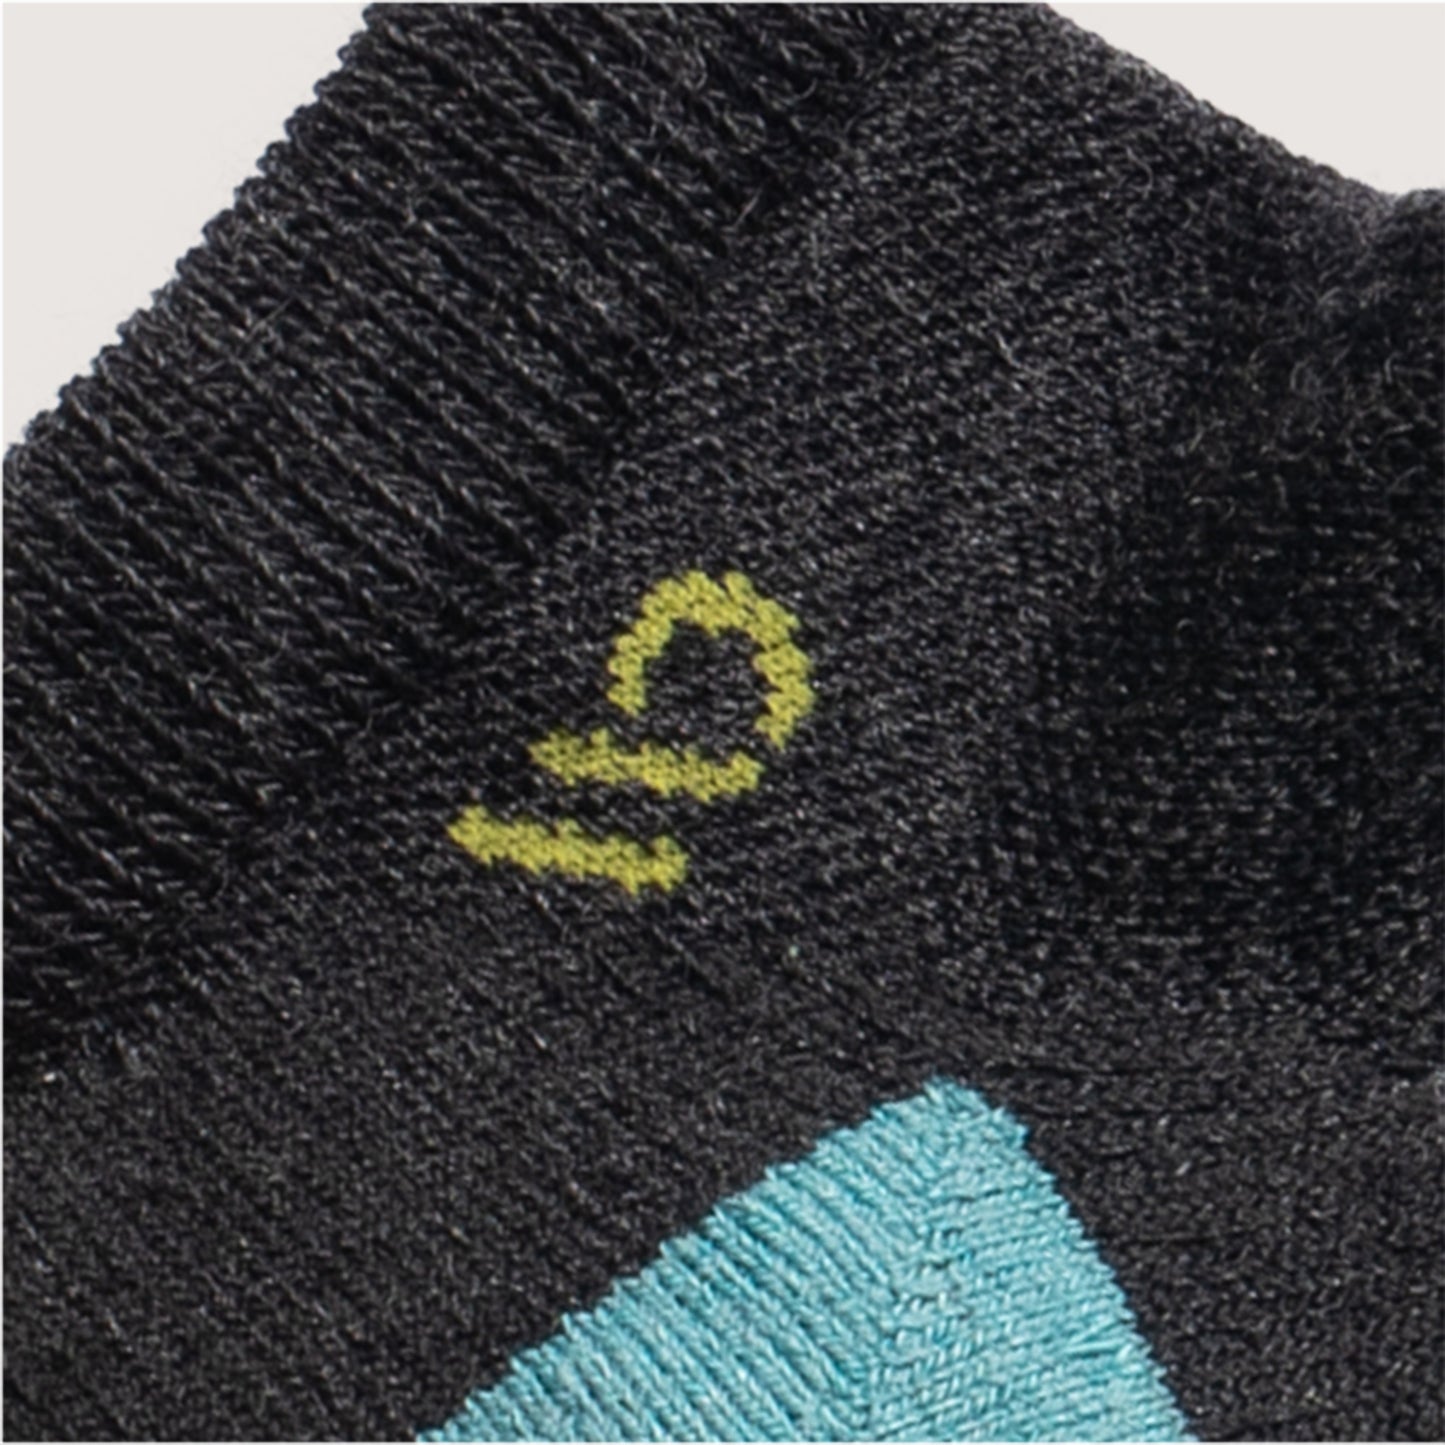 Detail featuring a yellow logo and light teal heal, with solid charcoal body --Charcoal